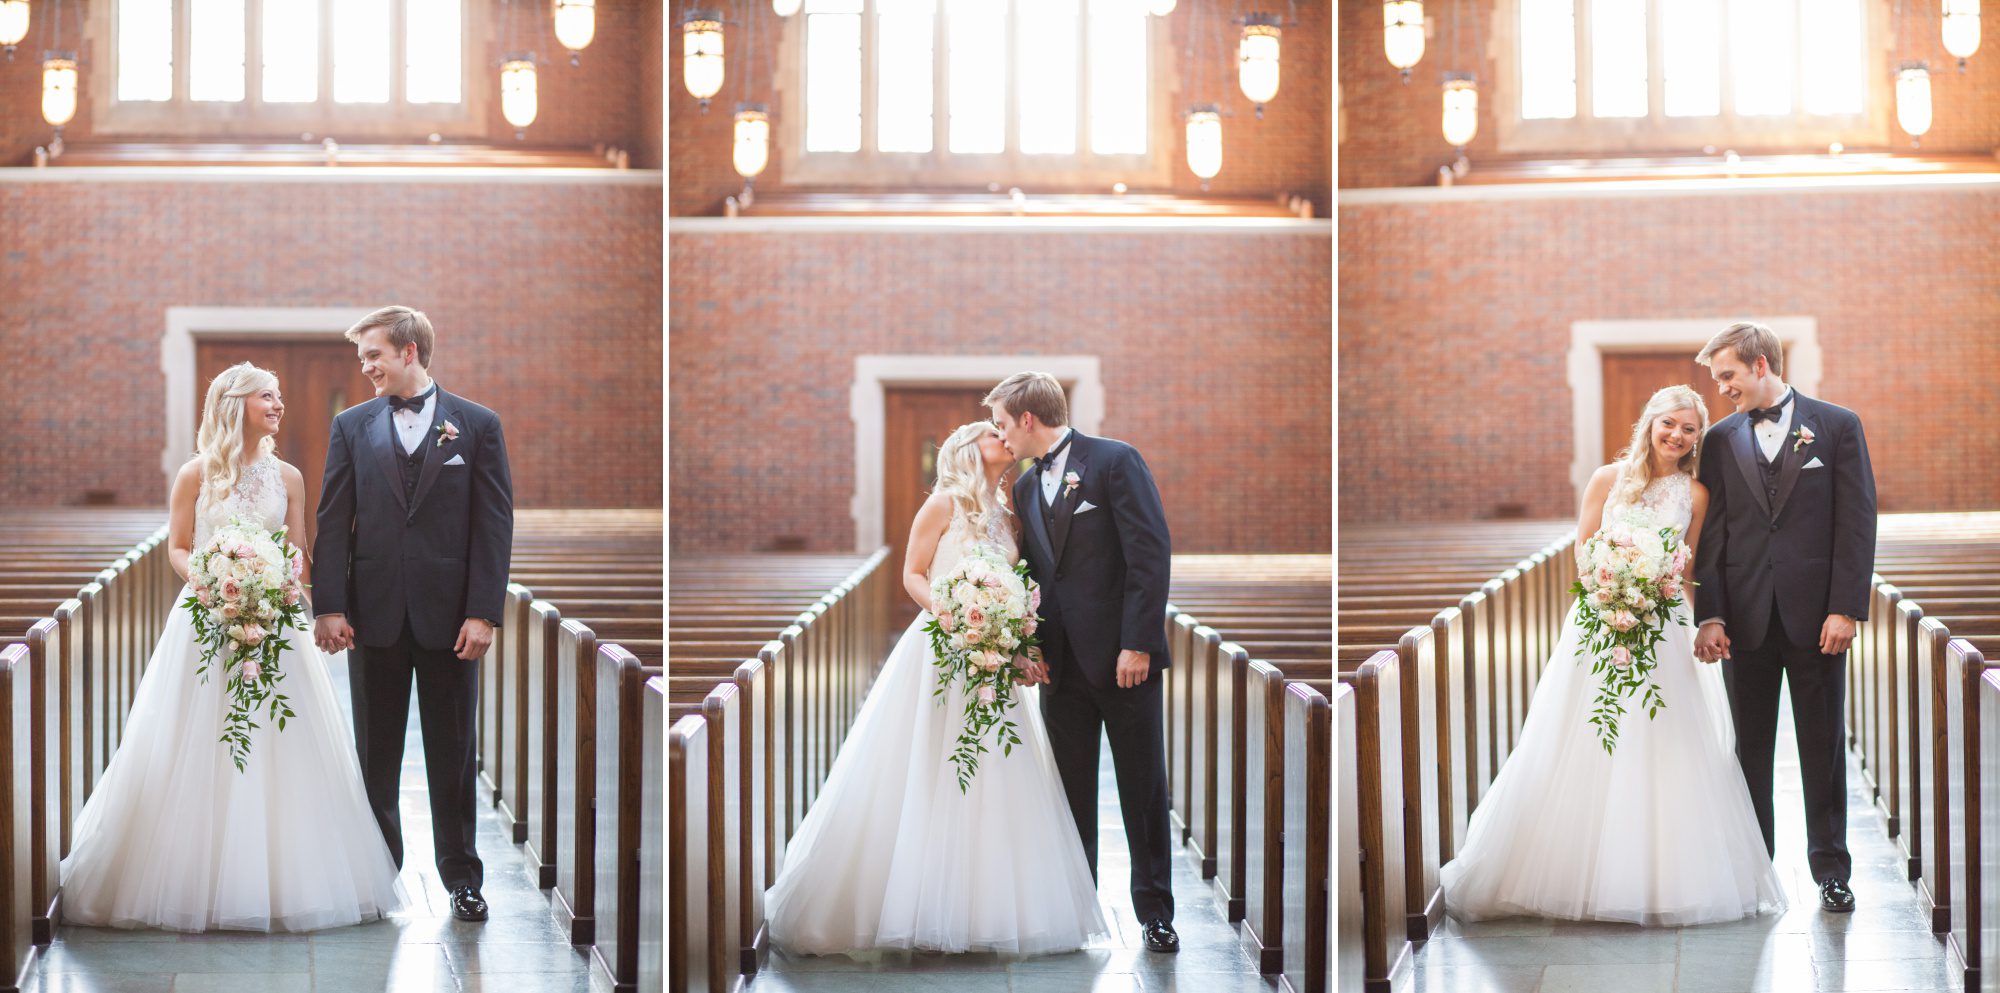 Bride and groom in Wightman Chapel at Scarritt Bennett before summer wedding ceremony in Nashville, TN. Photography by Krista Lee Photography.